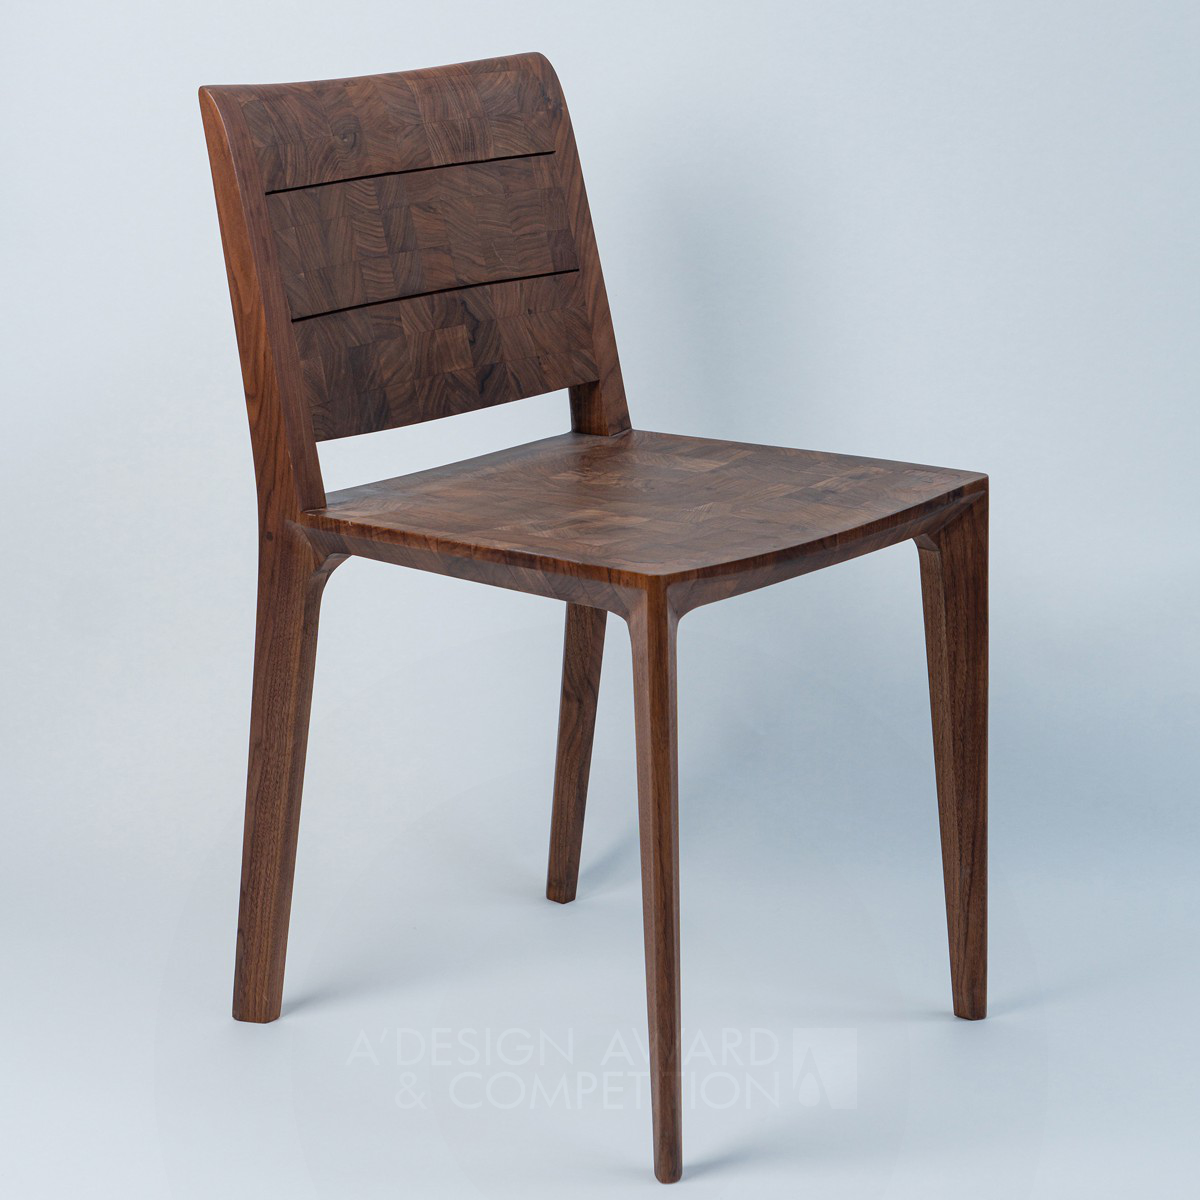 Huile Yi's Promotion Chair: A Unique End Grain Inspired Dining Chair